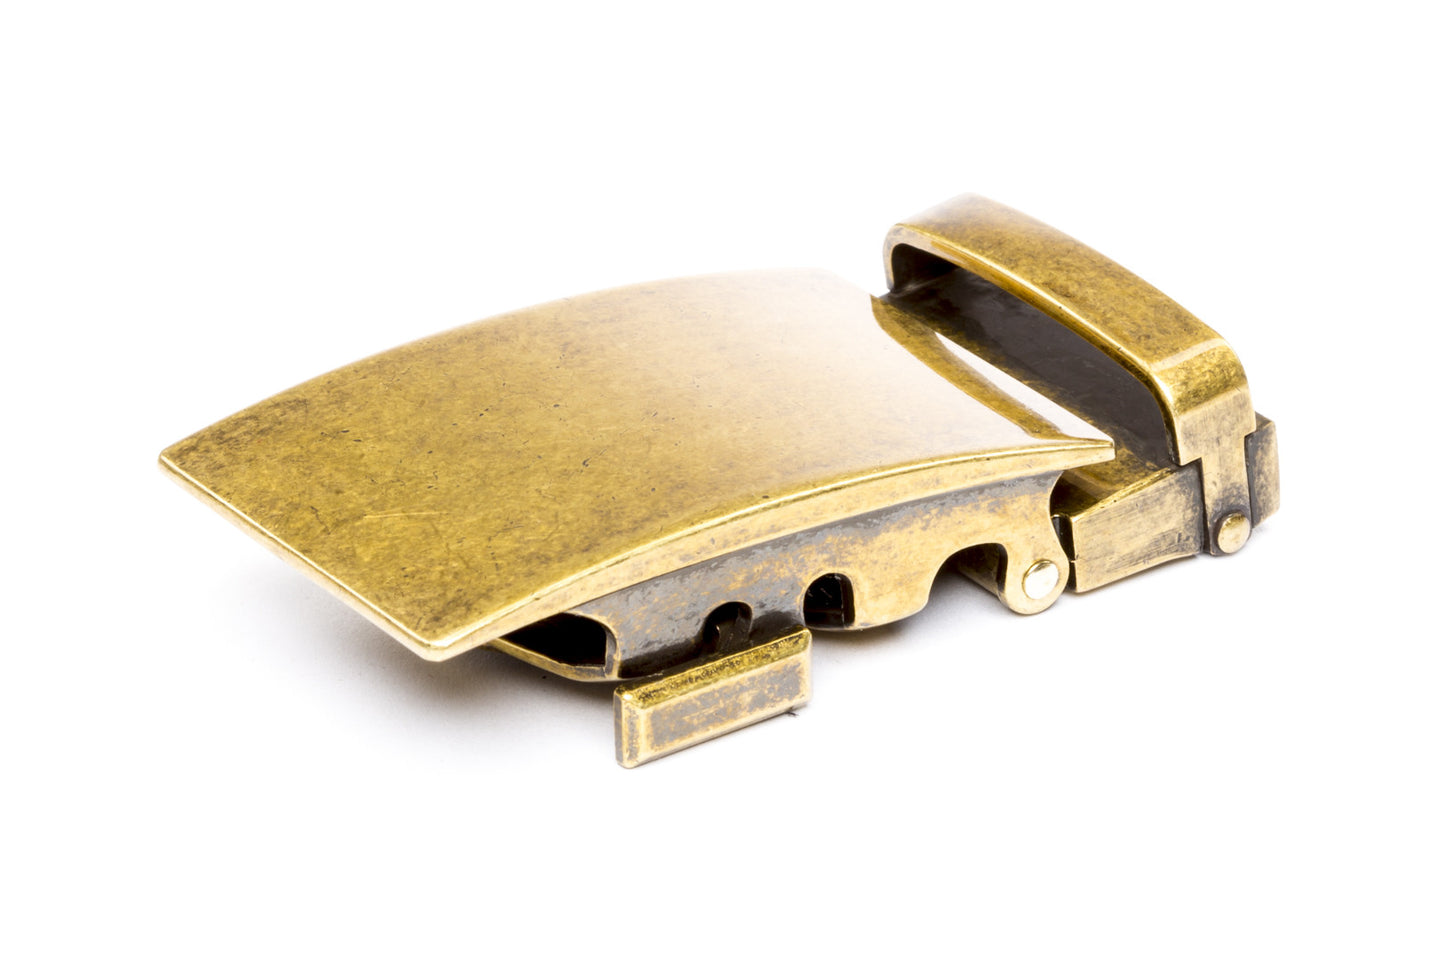 Men's classic ratchet belt buckle in antiqued gold with a width of 1.5 inches.